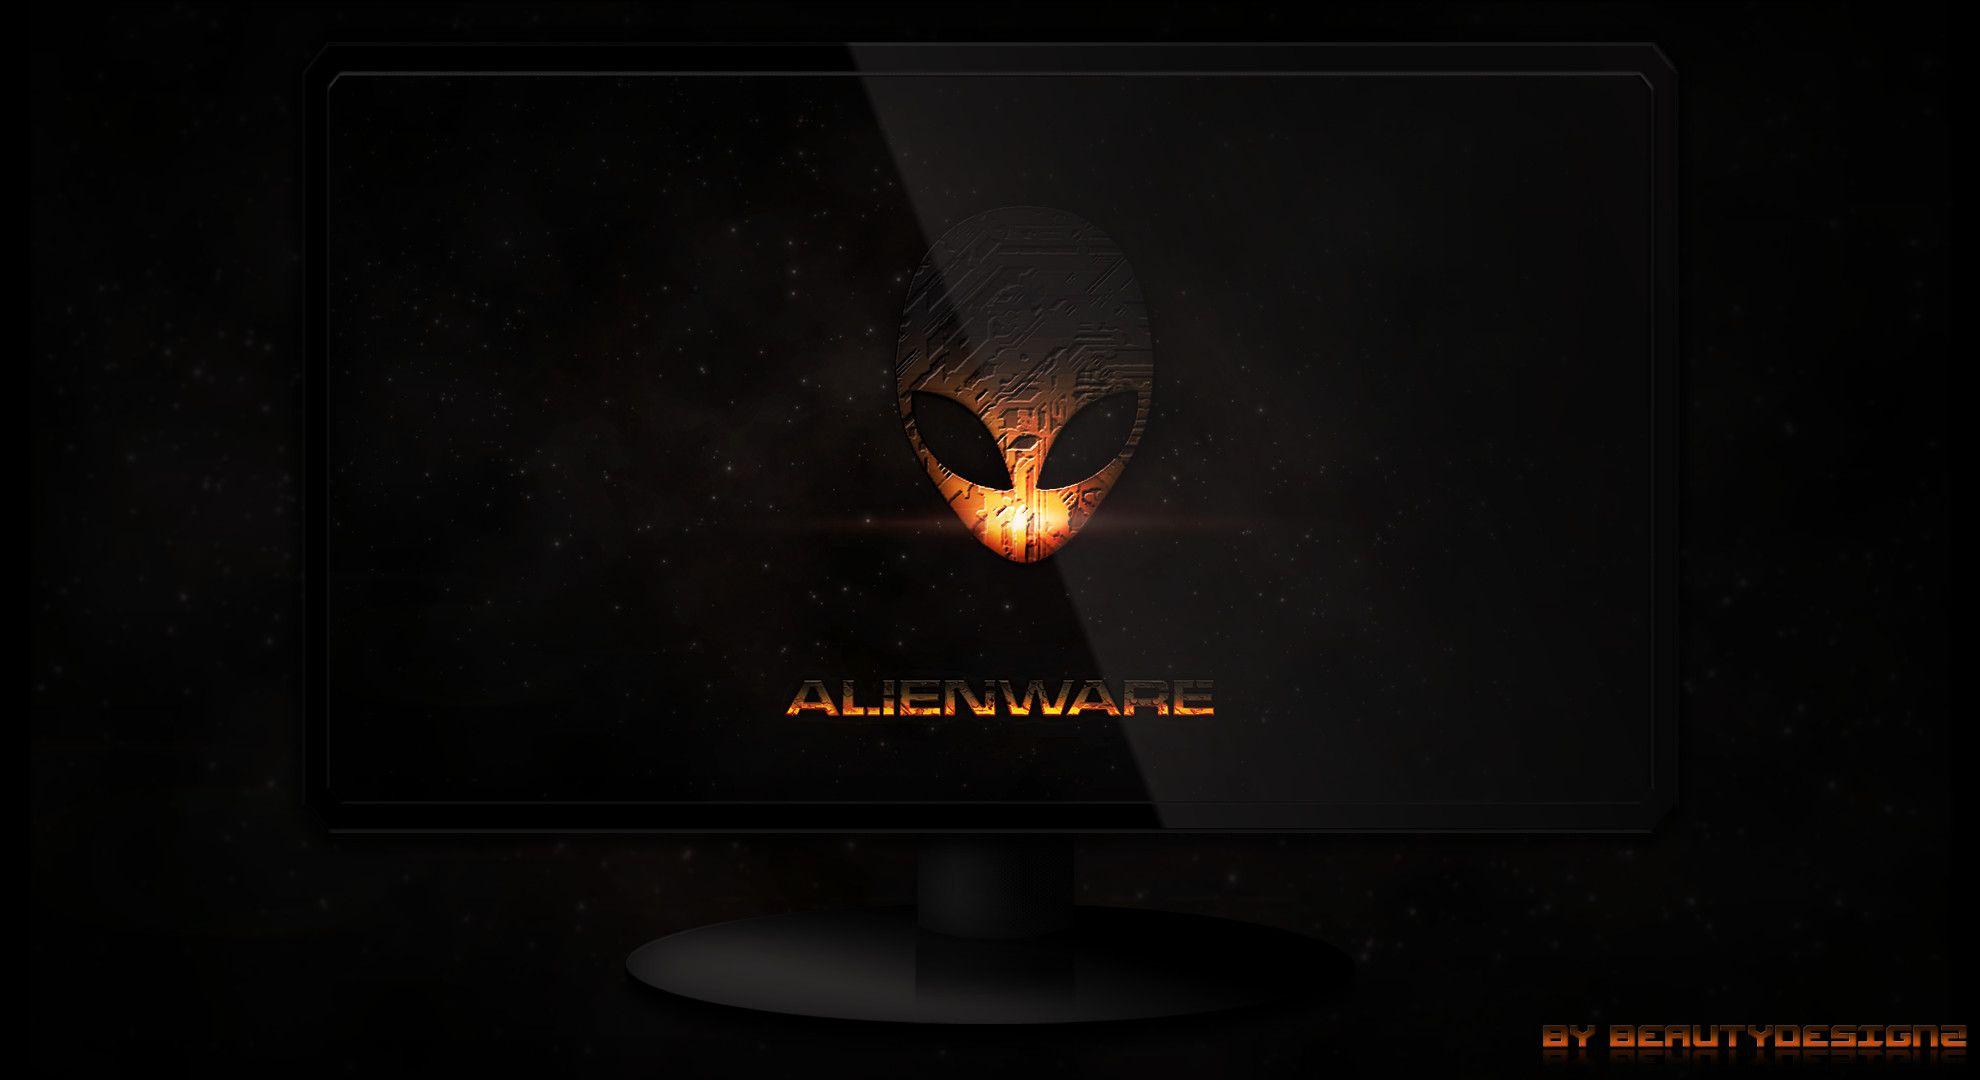 3623x2587 / alienware wallpaper for computer - Coolwallpapers.me!